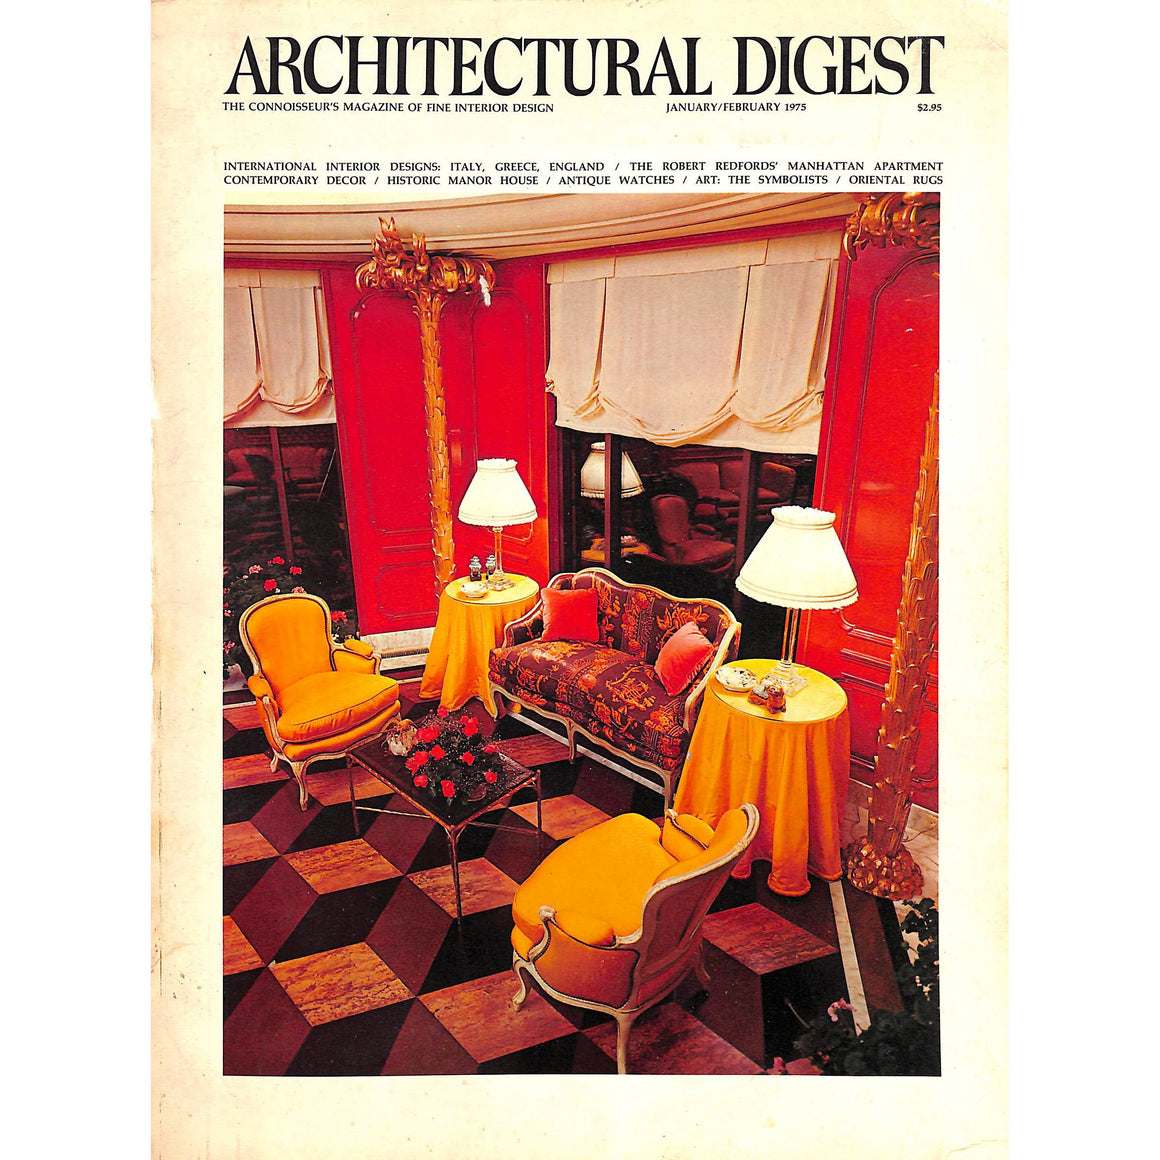 Architectural Digest January/February 1975